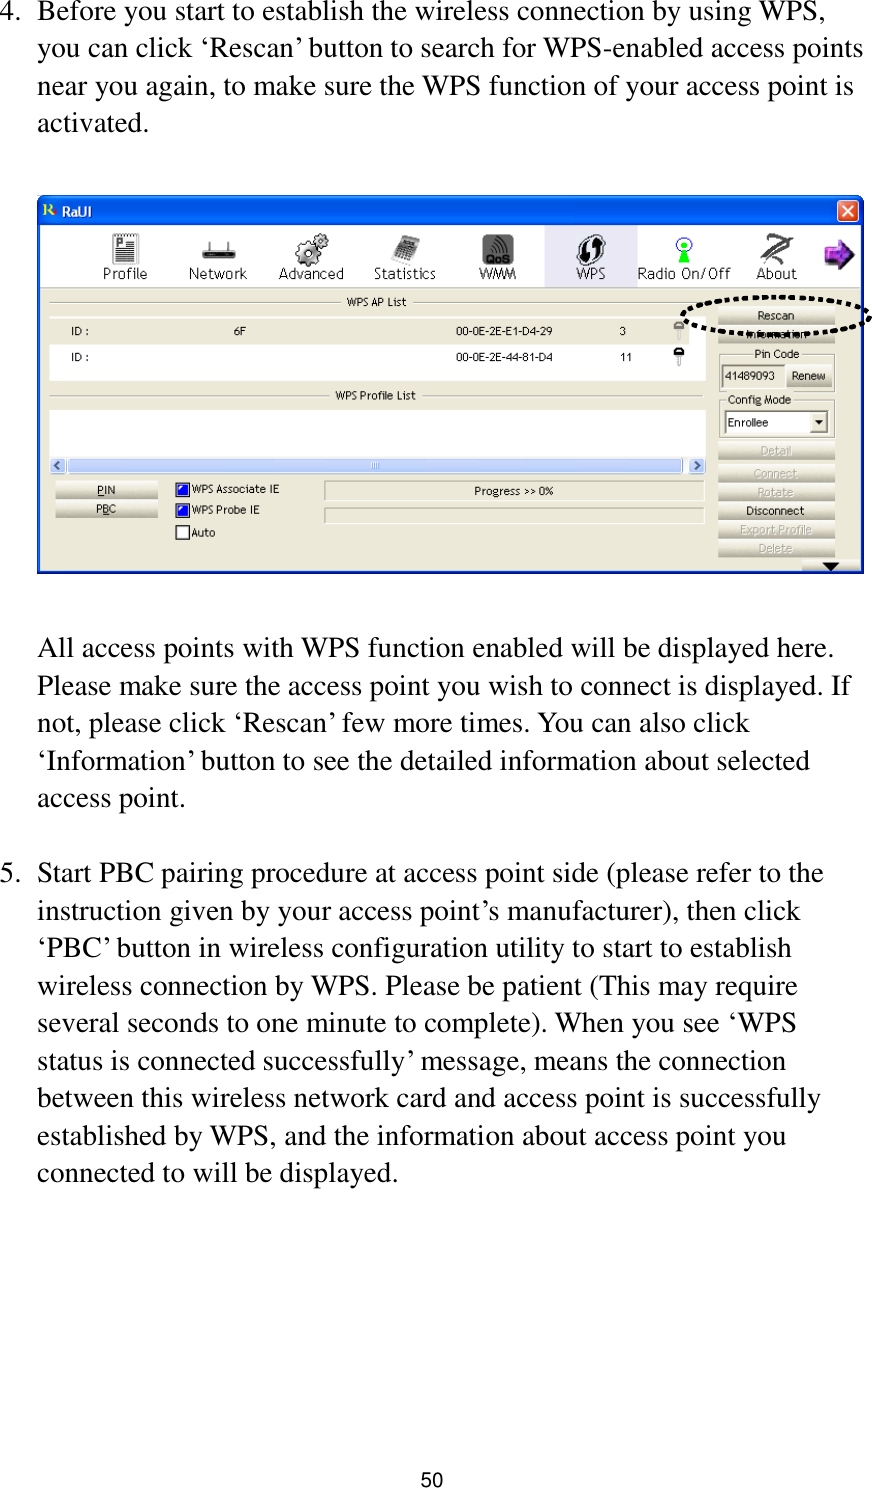  50 4. Before you start to establish the wireless connection by using WPS, you can click „Rescan‟ button to search for WPS-enabled access points near you again, to make sure the WPS function of your access point is activated.    All access points with WPS function enabled will be displayed here. Please make sure the access point you wish to connect is displayed. If not, please click „Rescan‟ few more times. You can also click „Information‟ button to see the detailed information about selected access point.  5. Start PBC pairing procedure at access point side (please refer to the instruction given by your access point‟s manufacturer), then click „PBC‟ button in wireless configuration utility to start to establish wireless connection by WPS. Please be patient (This may require several seconds to one minute to complete). When you see „WPS status is connected successfully‟ message, means the connection between this wireless network card and access point is successfully established by WPS, and the information about access point you connected to will be displayed.       